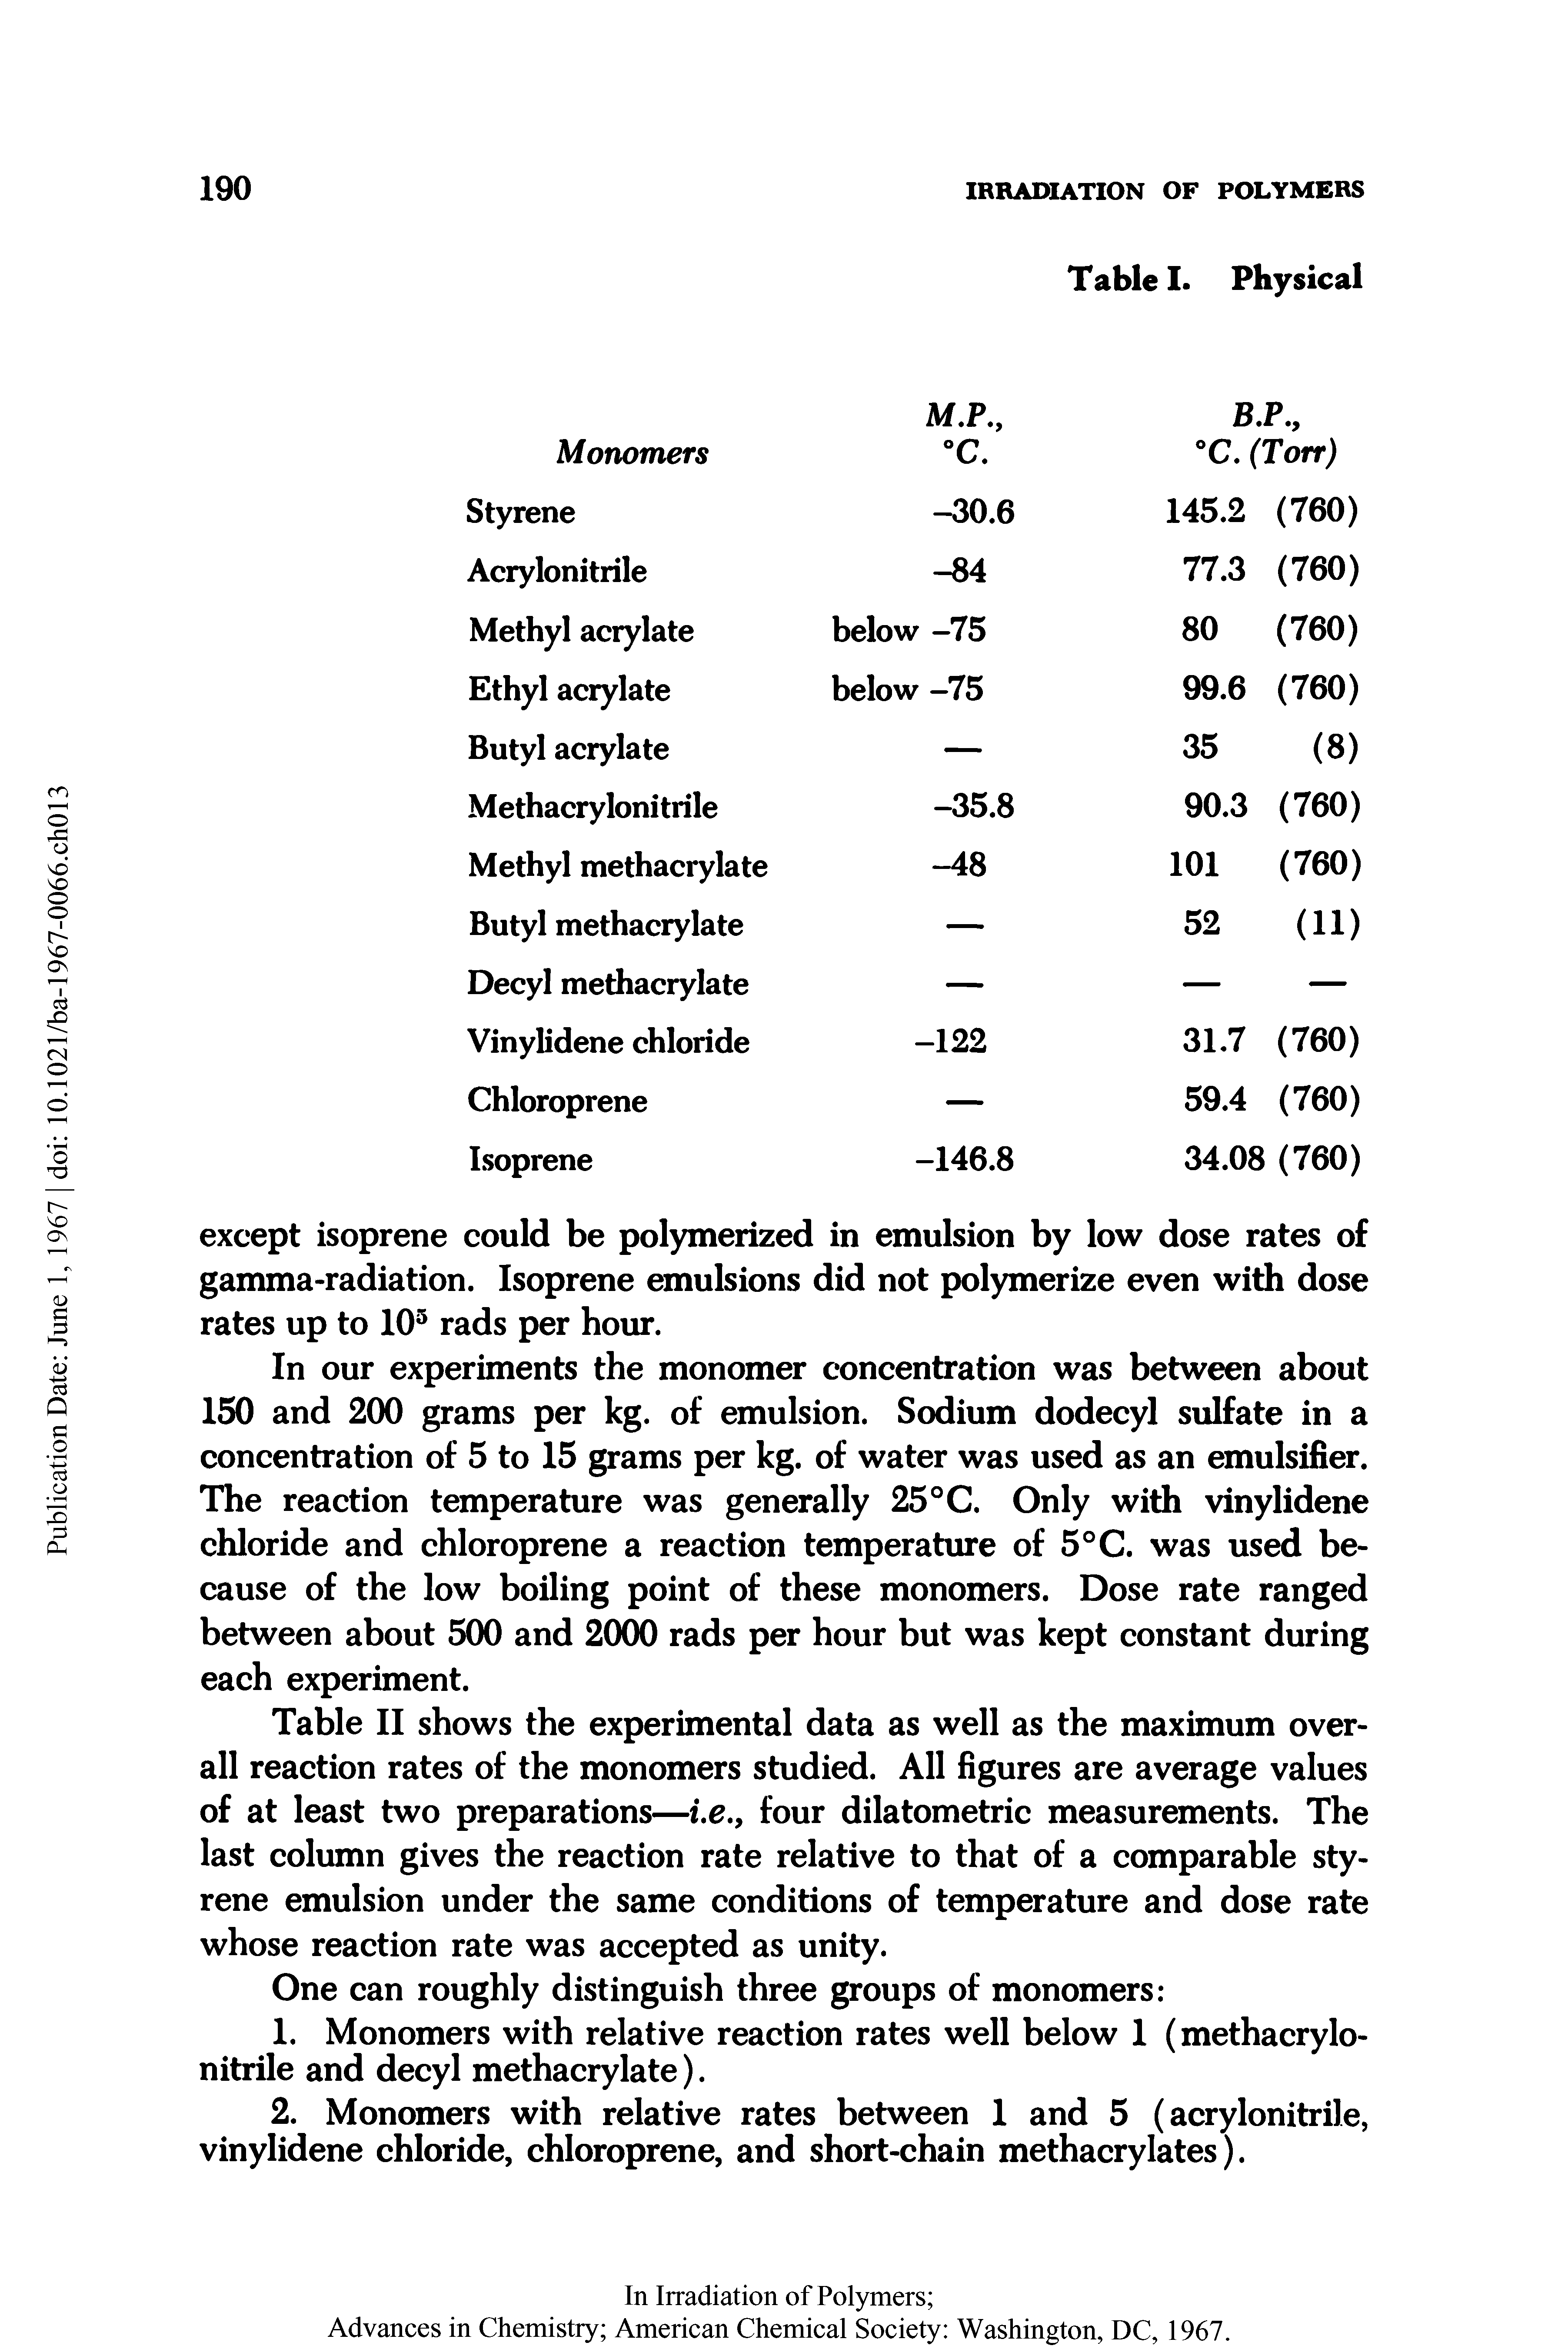 Table II shows the experimental data as well as the maximum overall reaction rates of the monomers studied. All figures are average values of at least two preparations—i.e., four dilatometric measurements. The last column gives the reaction rate relative to that of a comparable styrene emulsion under the same conditions of temperature and dose rate whose reaction rate was accepted as unity.